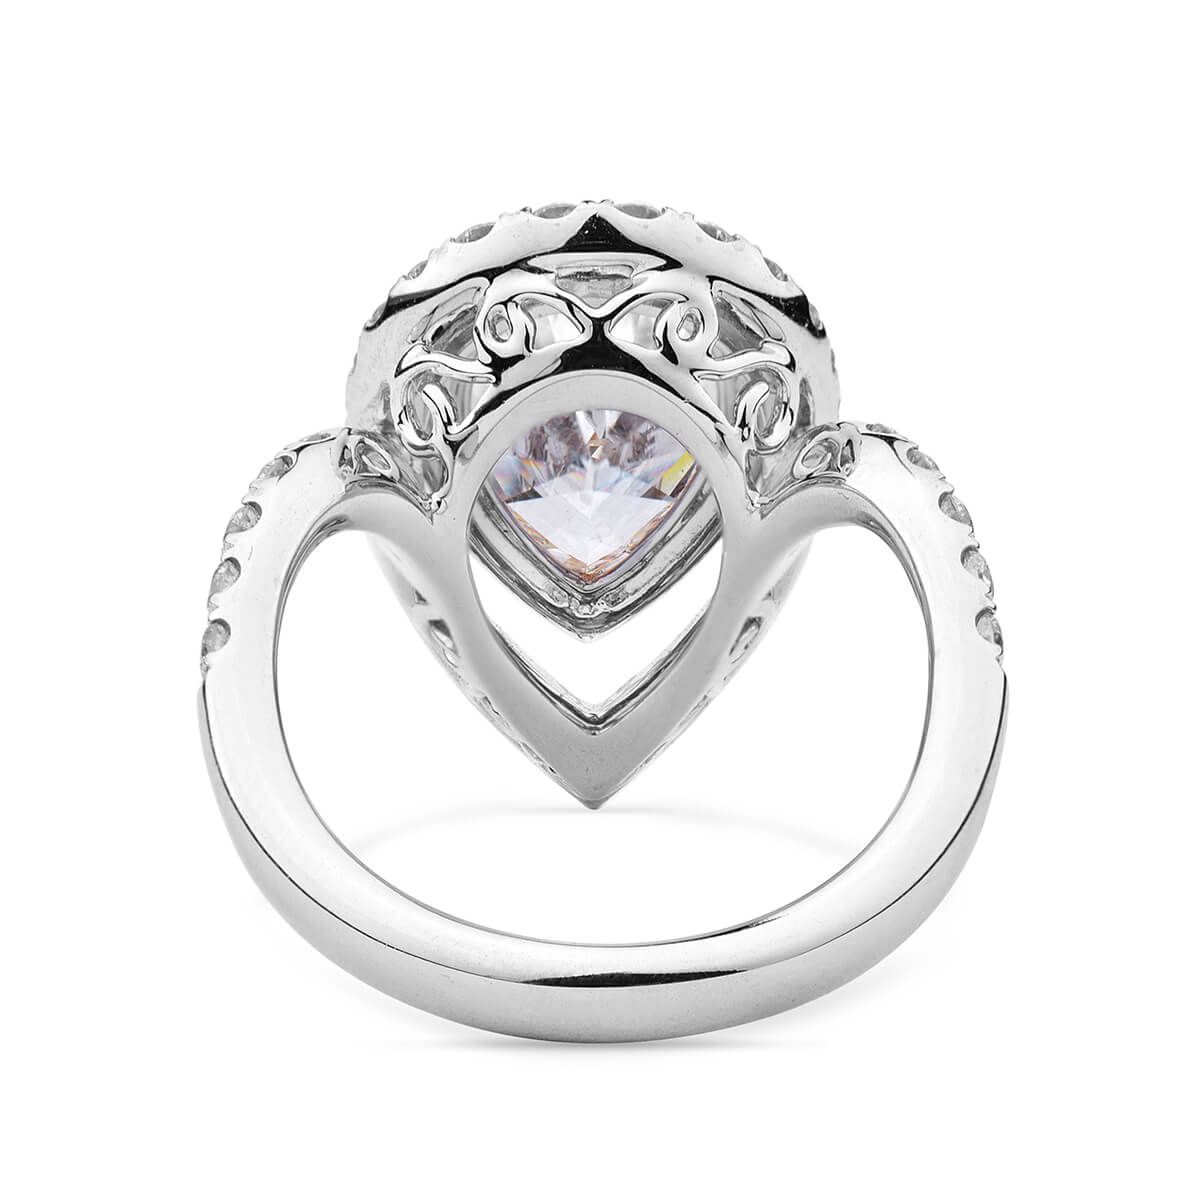  White Diamond Ring, 3.00 Ct. (3.85 Ct. TW), Pear shape, HRD Certified, 170003027667